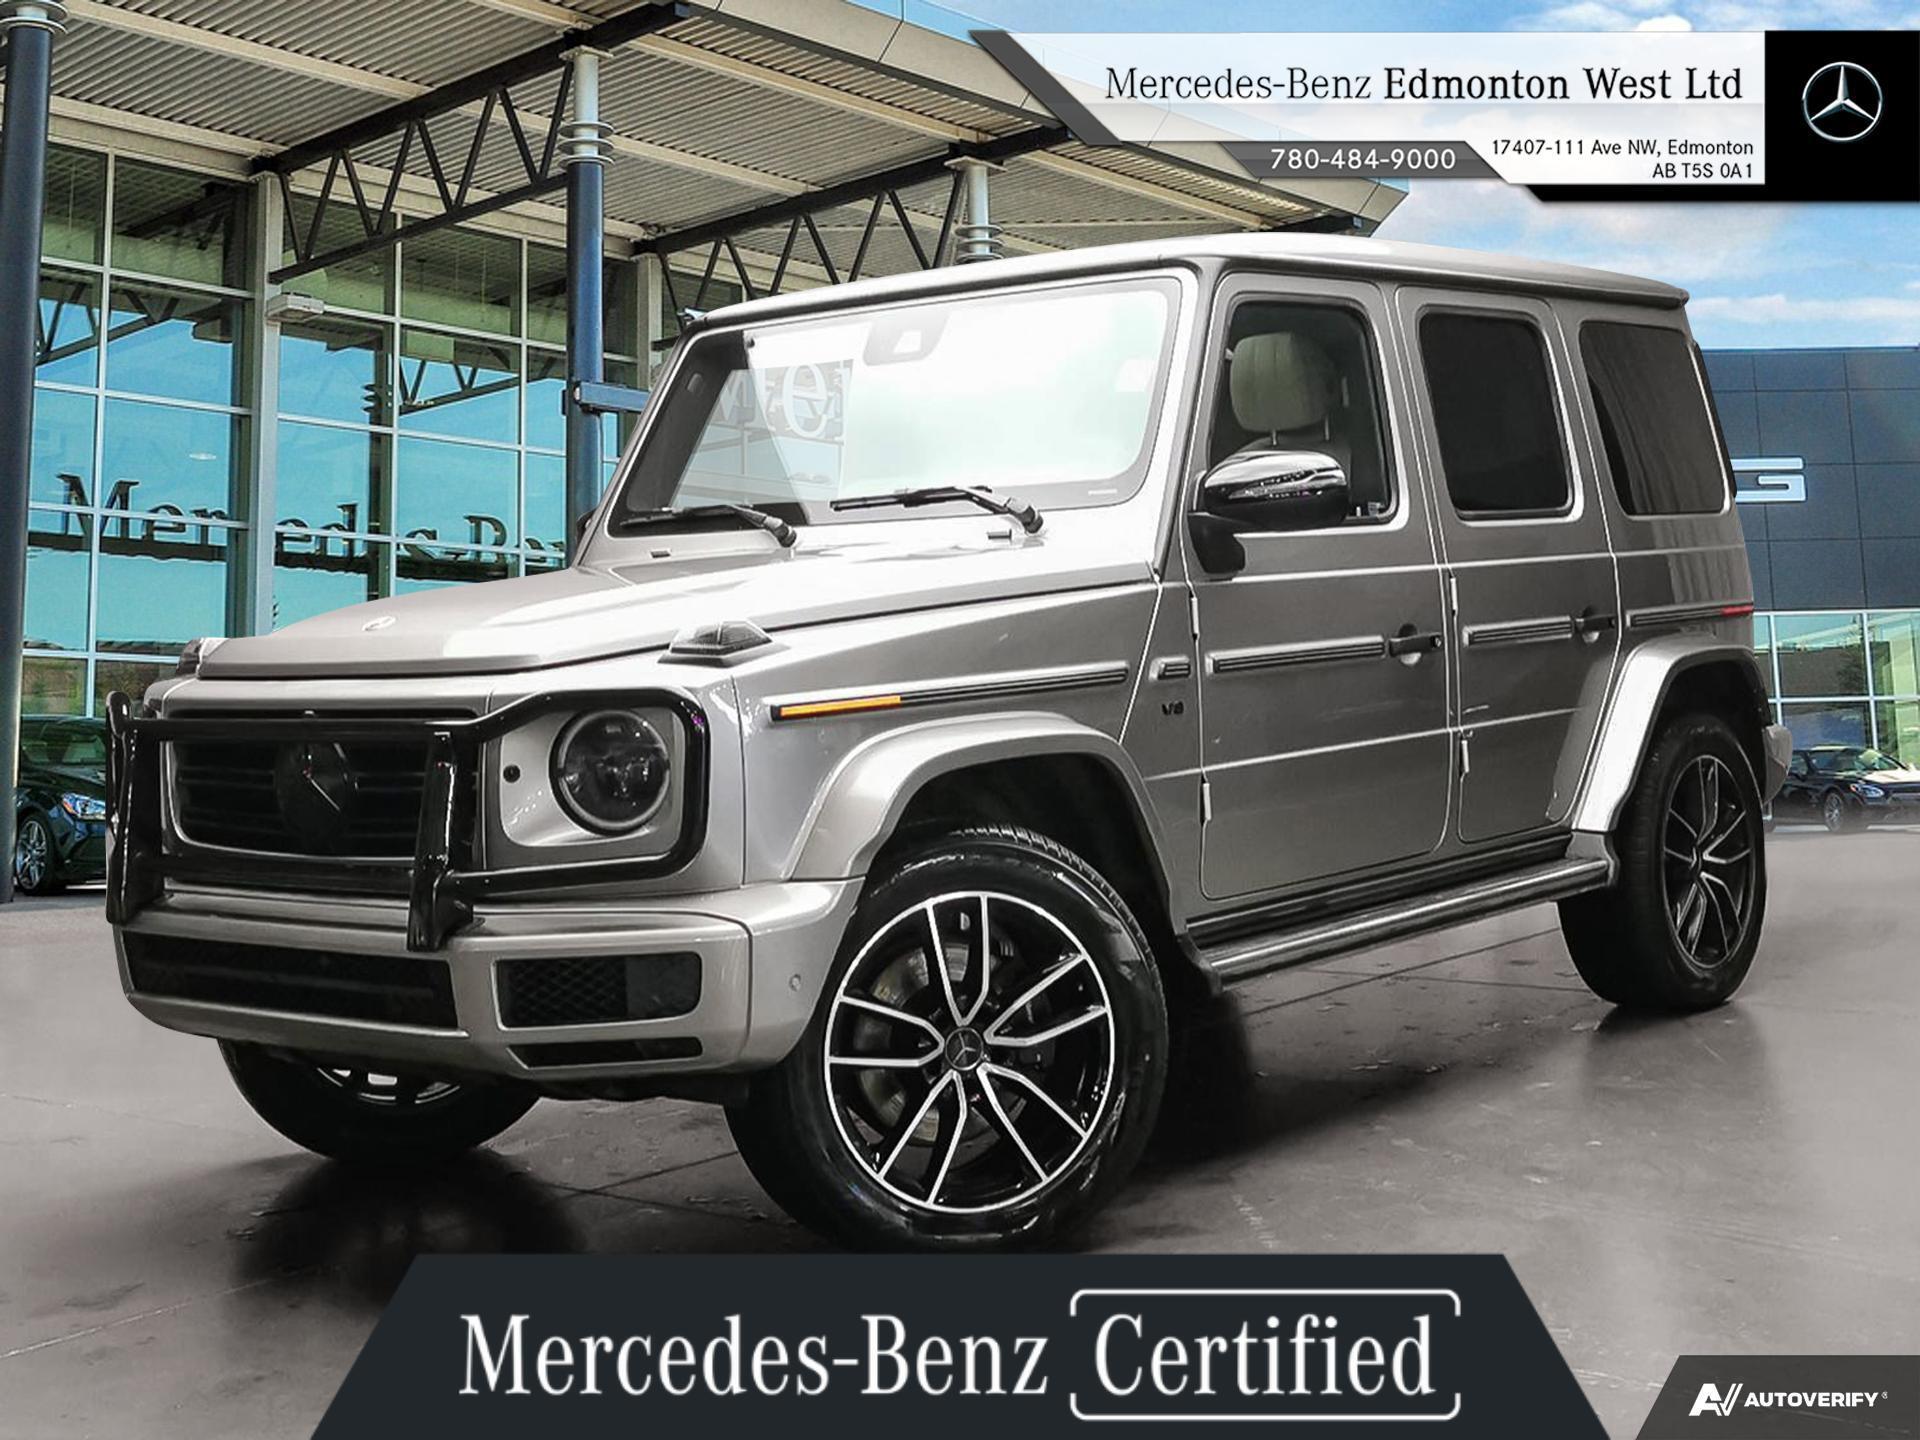 2021 Mercedes-Benz G-Class G 550 4MATIC  - Xpel Protection Film - AMG Line w/